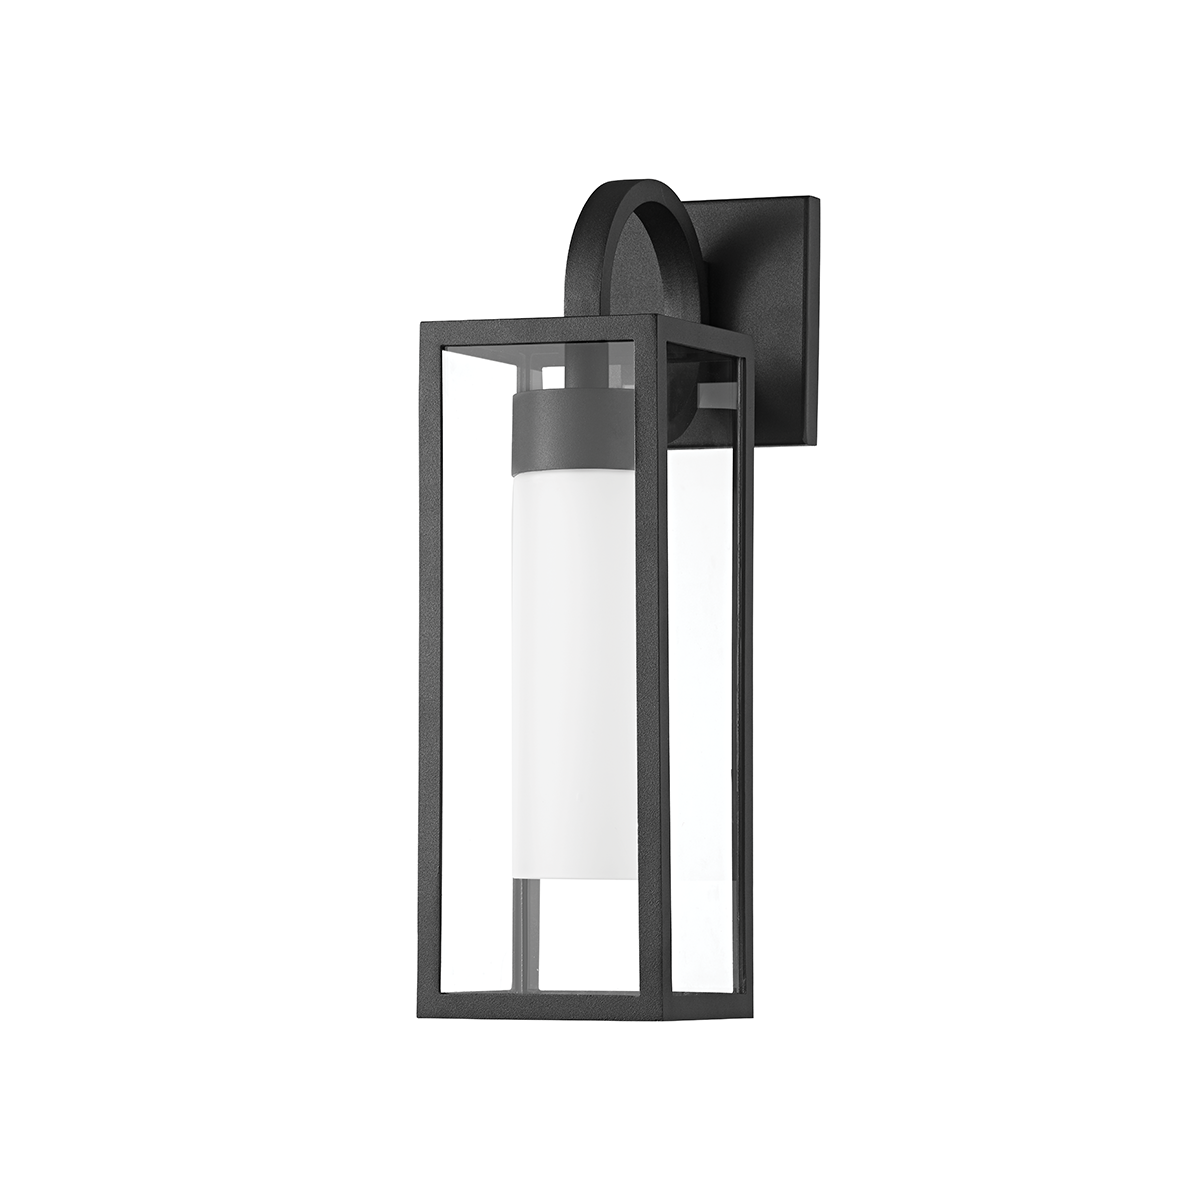 Troy PAX 1 LIGHT SMALL EXTERIOR WALL SCONCE B6911 Outdoor l Wall Troy Lighting TEXTURE BLACK  